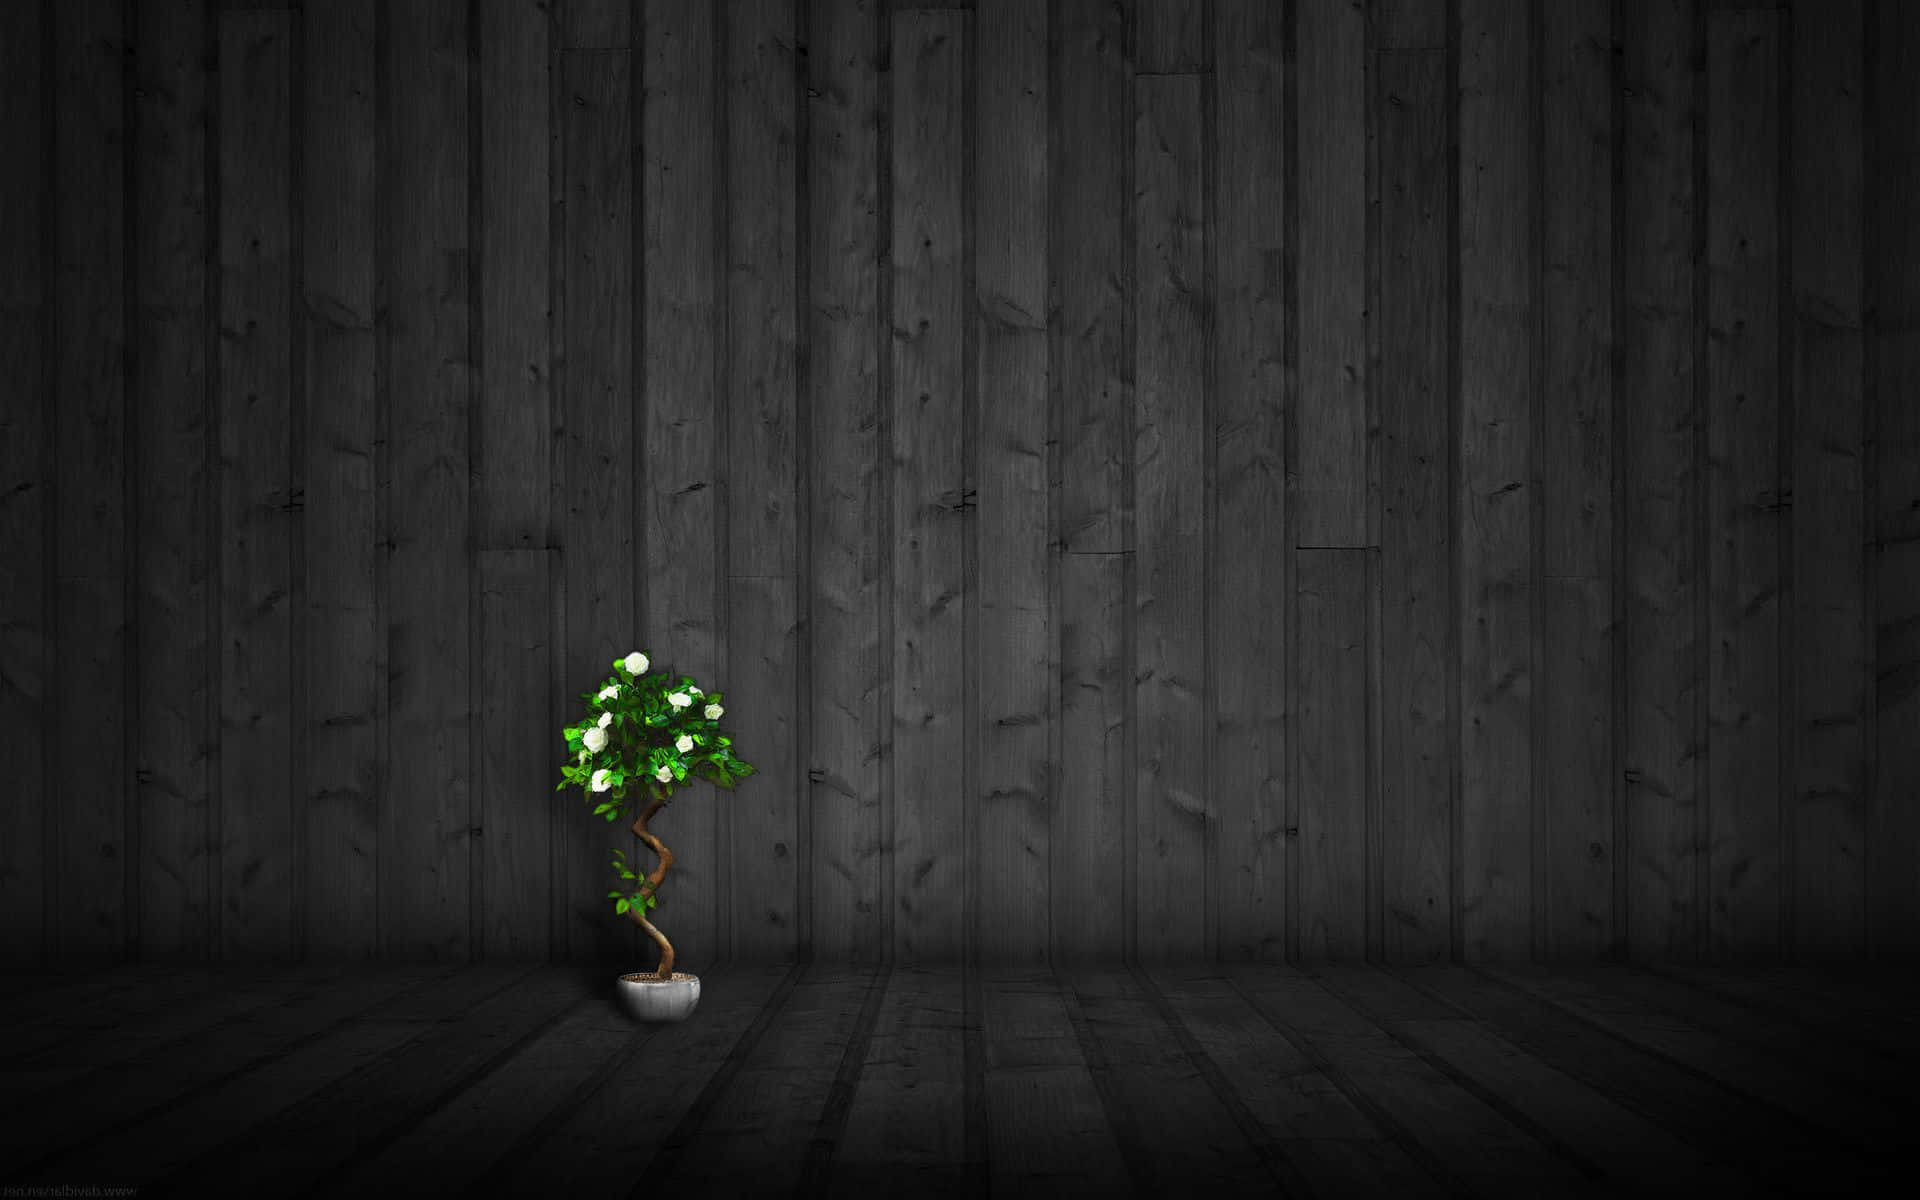 A Small Tree In A Wooden Room